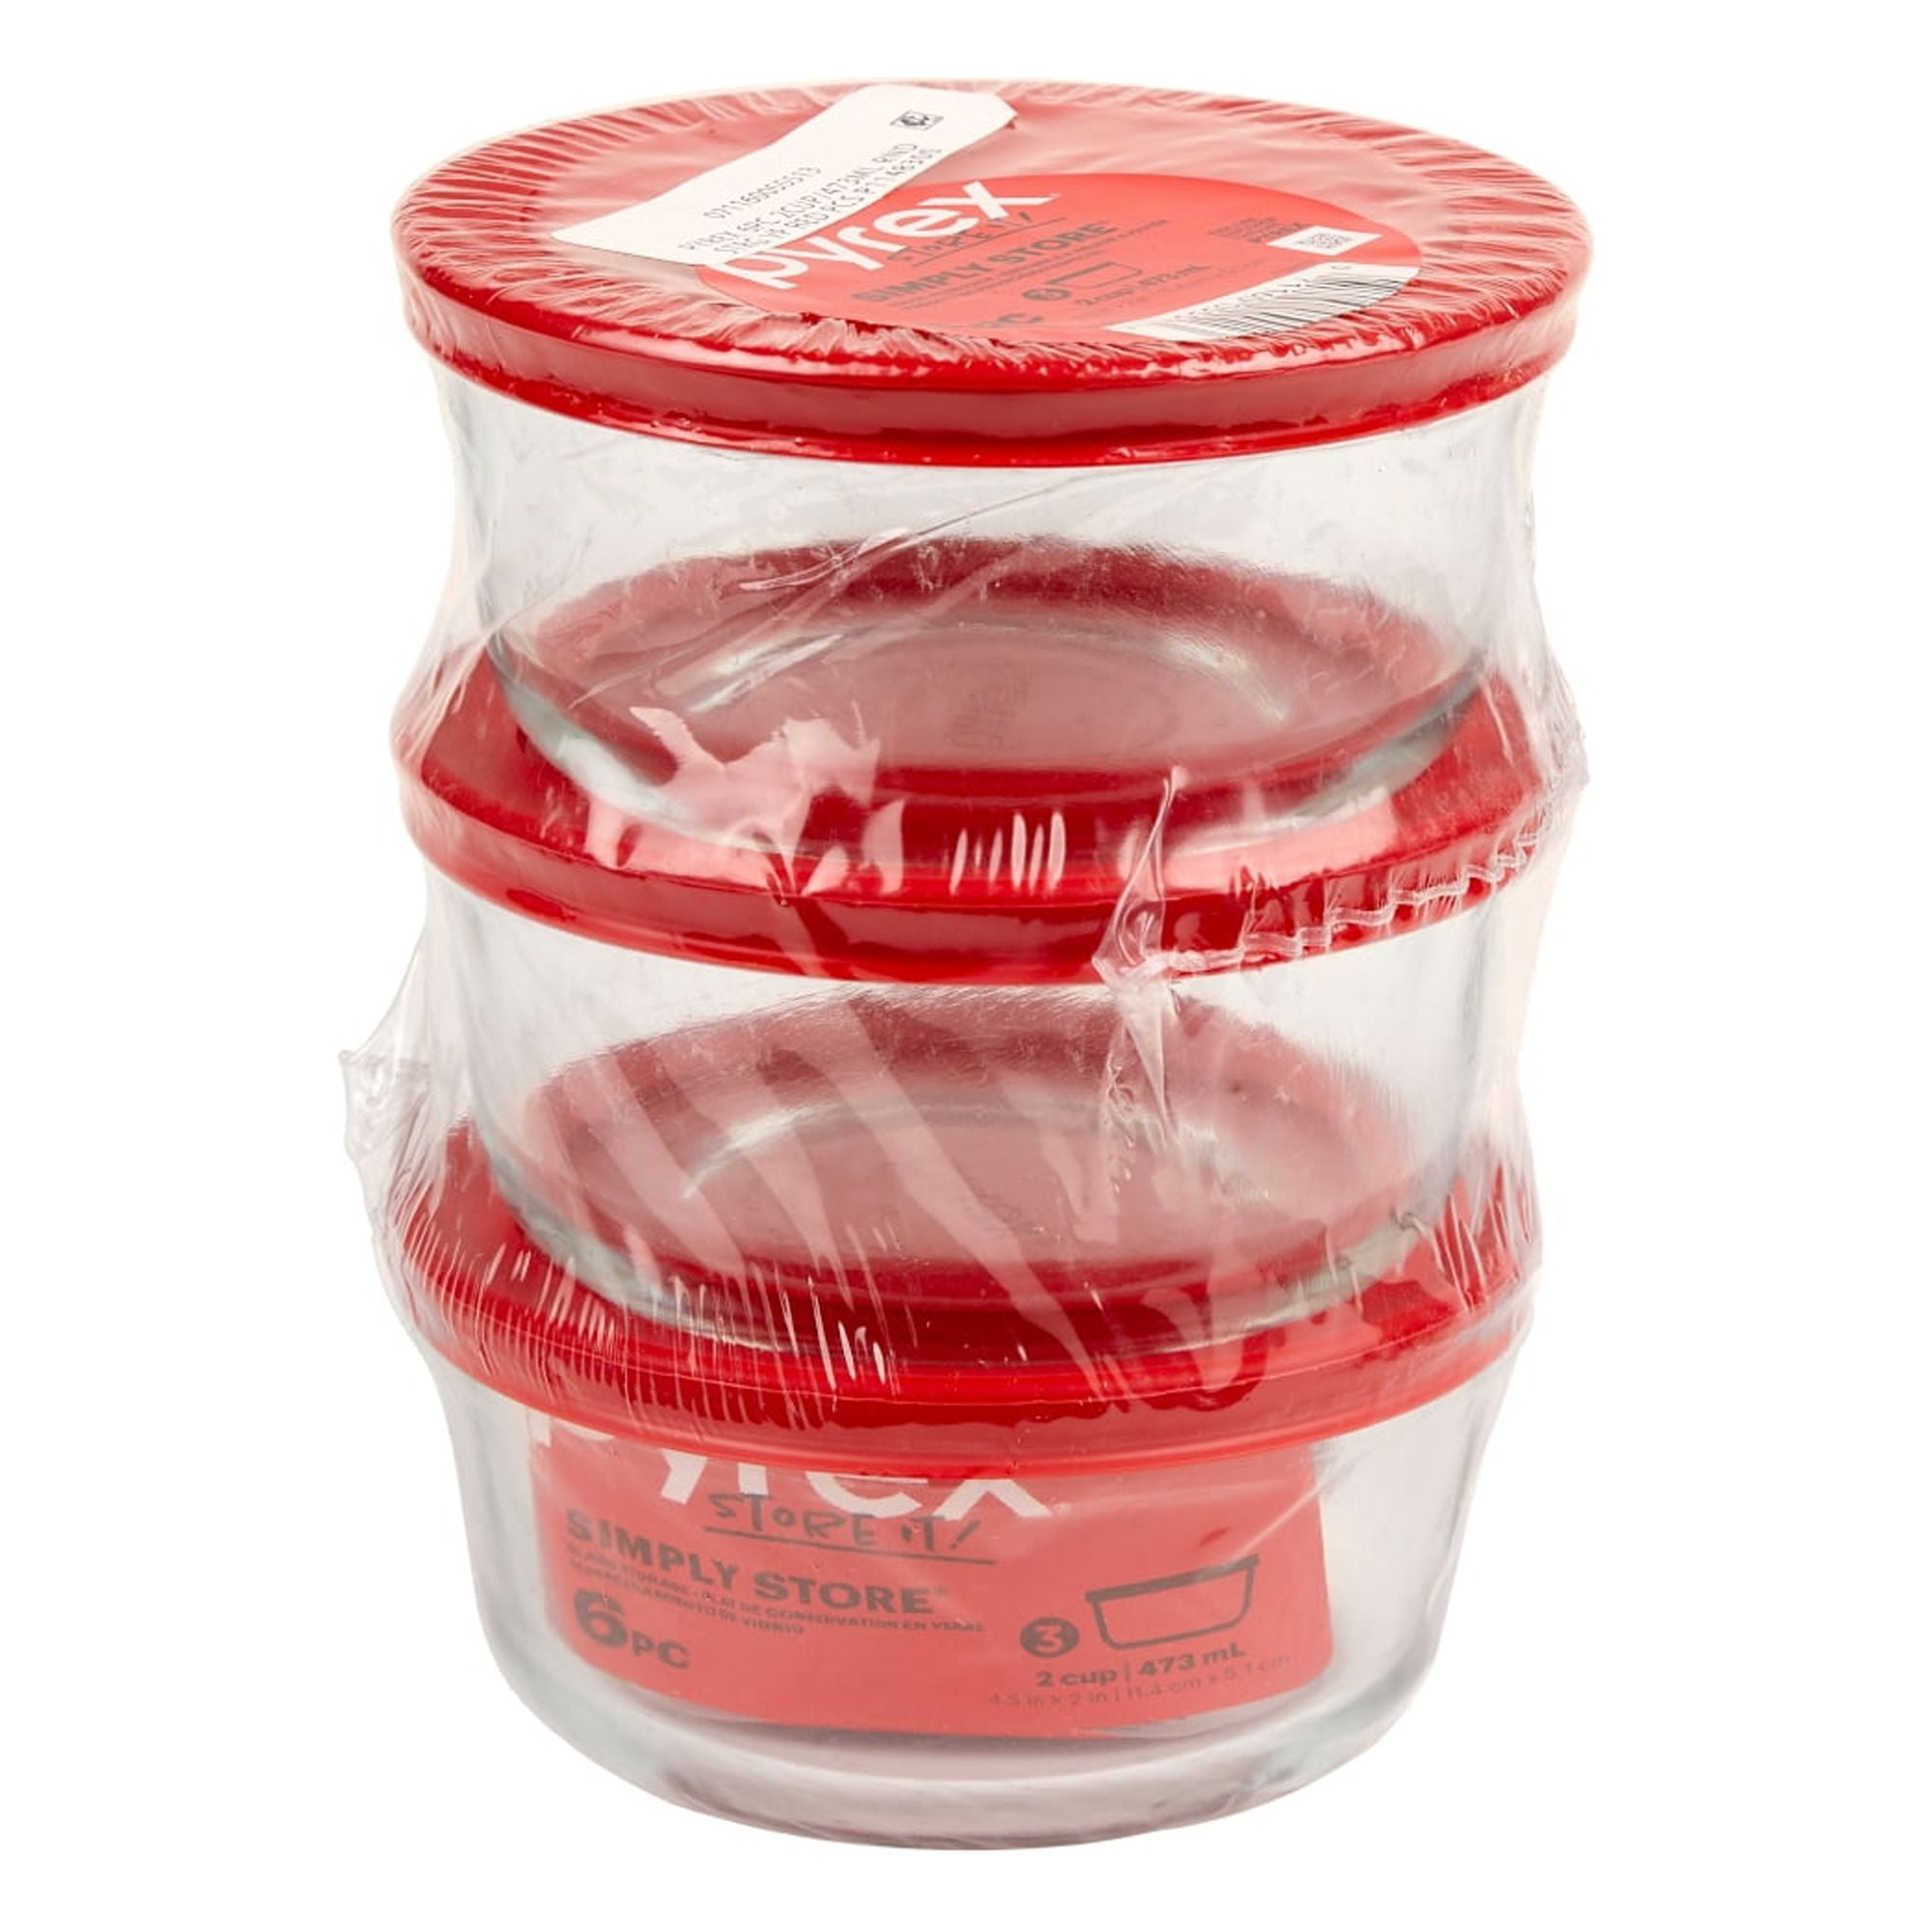 Pyrex Simply Store 2-Cup Glass Storage Container Set with Lids (6